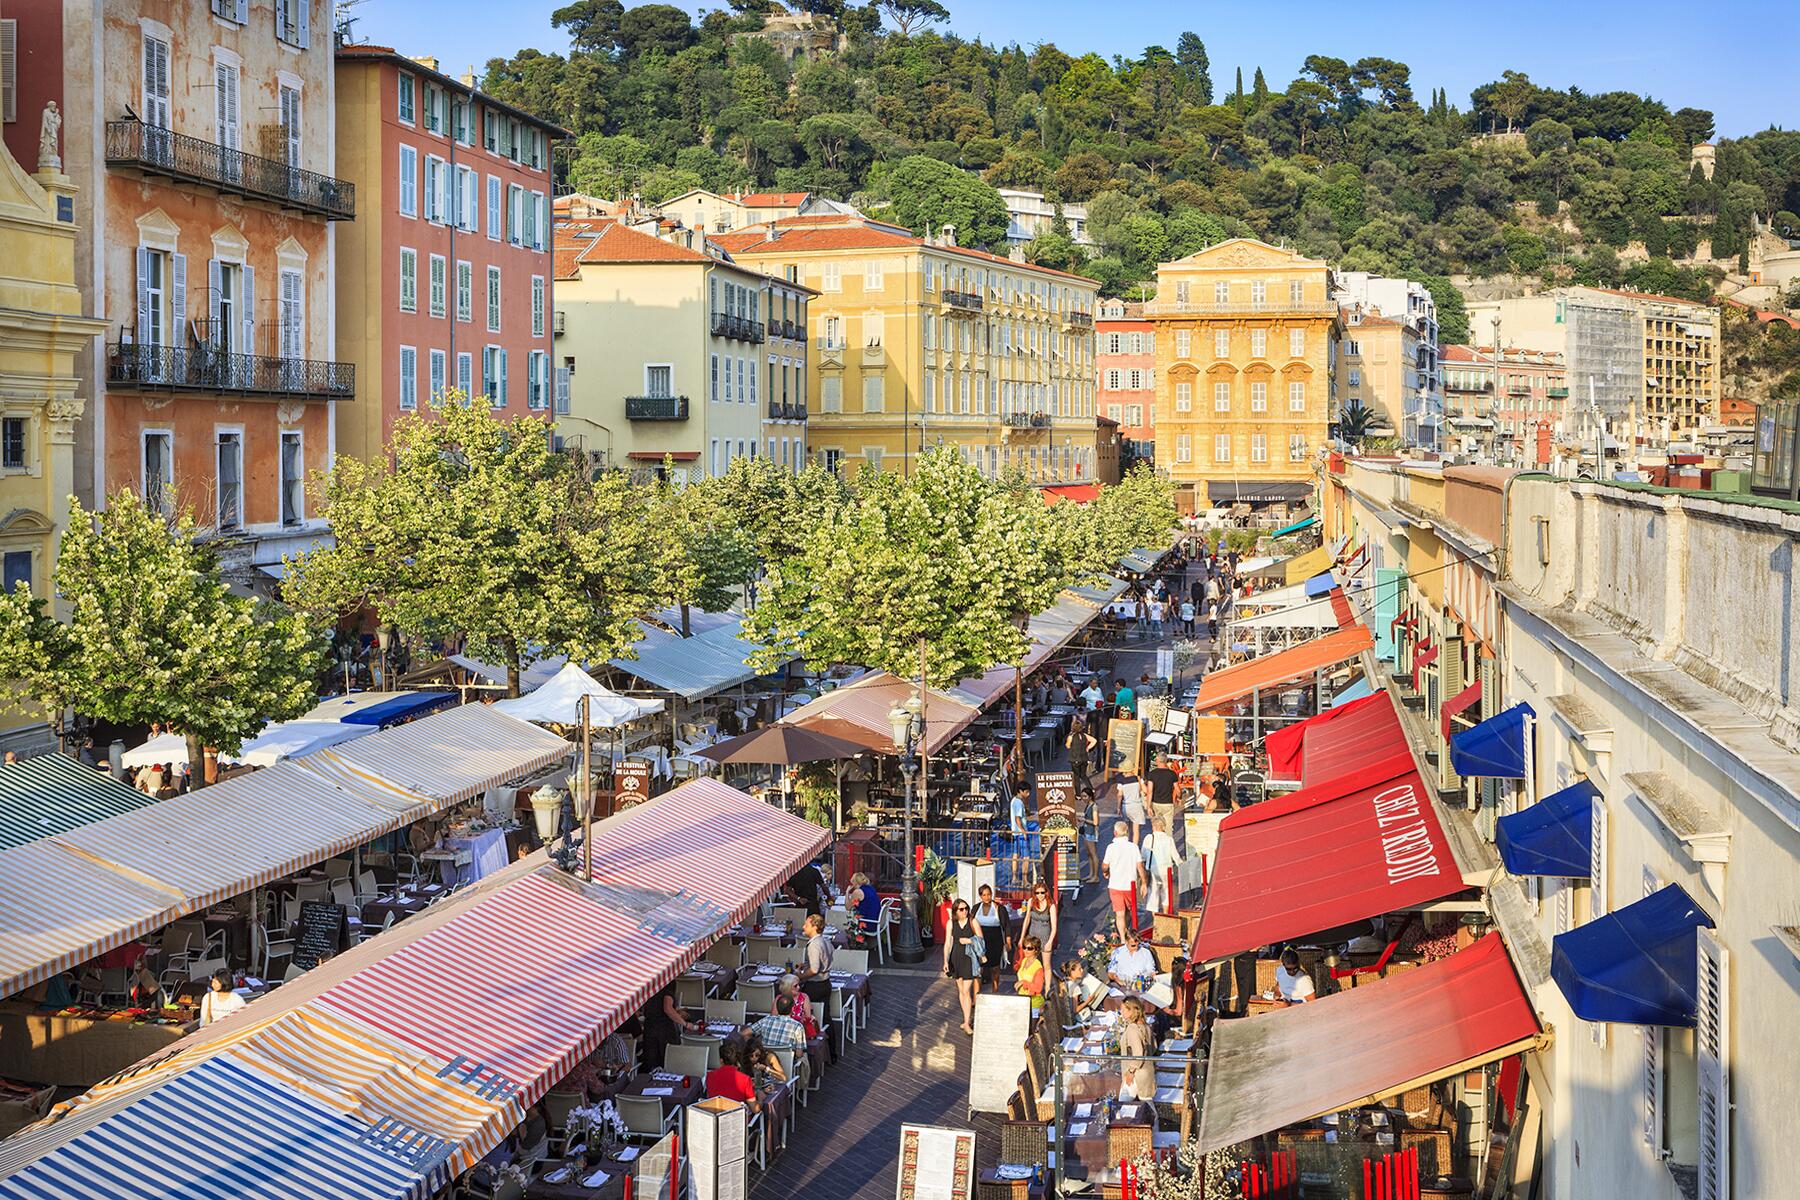 <a href='https://www.fodors.com/world/europe/france/the-french-riviera/experiences/news/photos/locals-guide-to-the-french-riviera-from-saint-tropez-to-menton-france#'>From &quot;The French Riviera Can Be Intimidating. Here's How to Experience It Like a Local: Stick to the Old Towns&quot;</a>